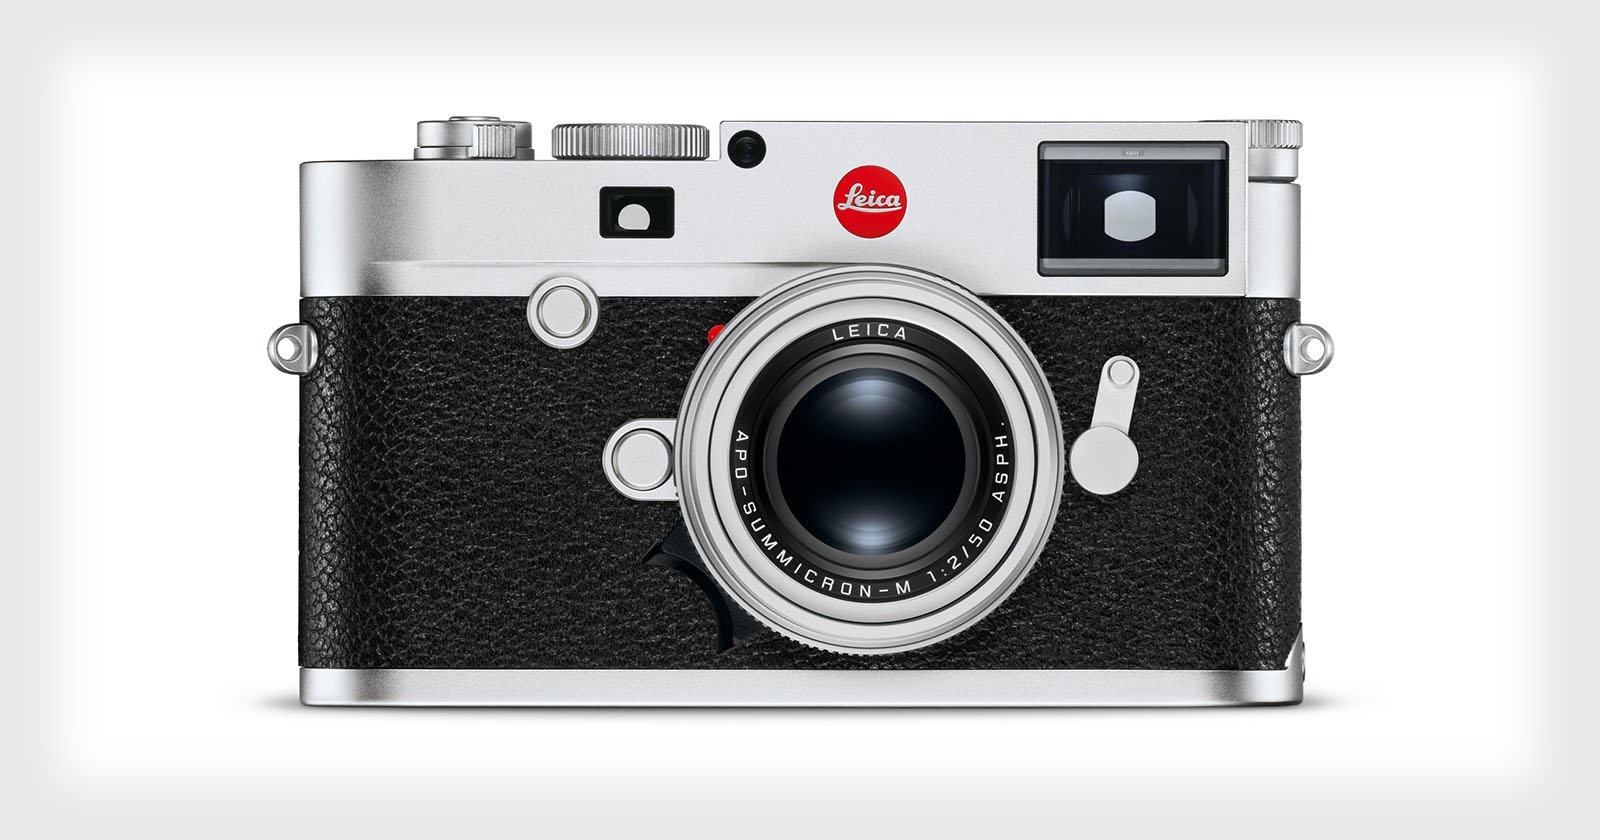 The New Leica M10 Features a Thinner Body, ISO Dial, and Wi-Fi